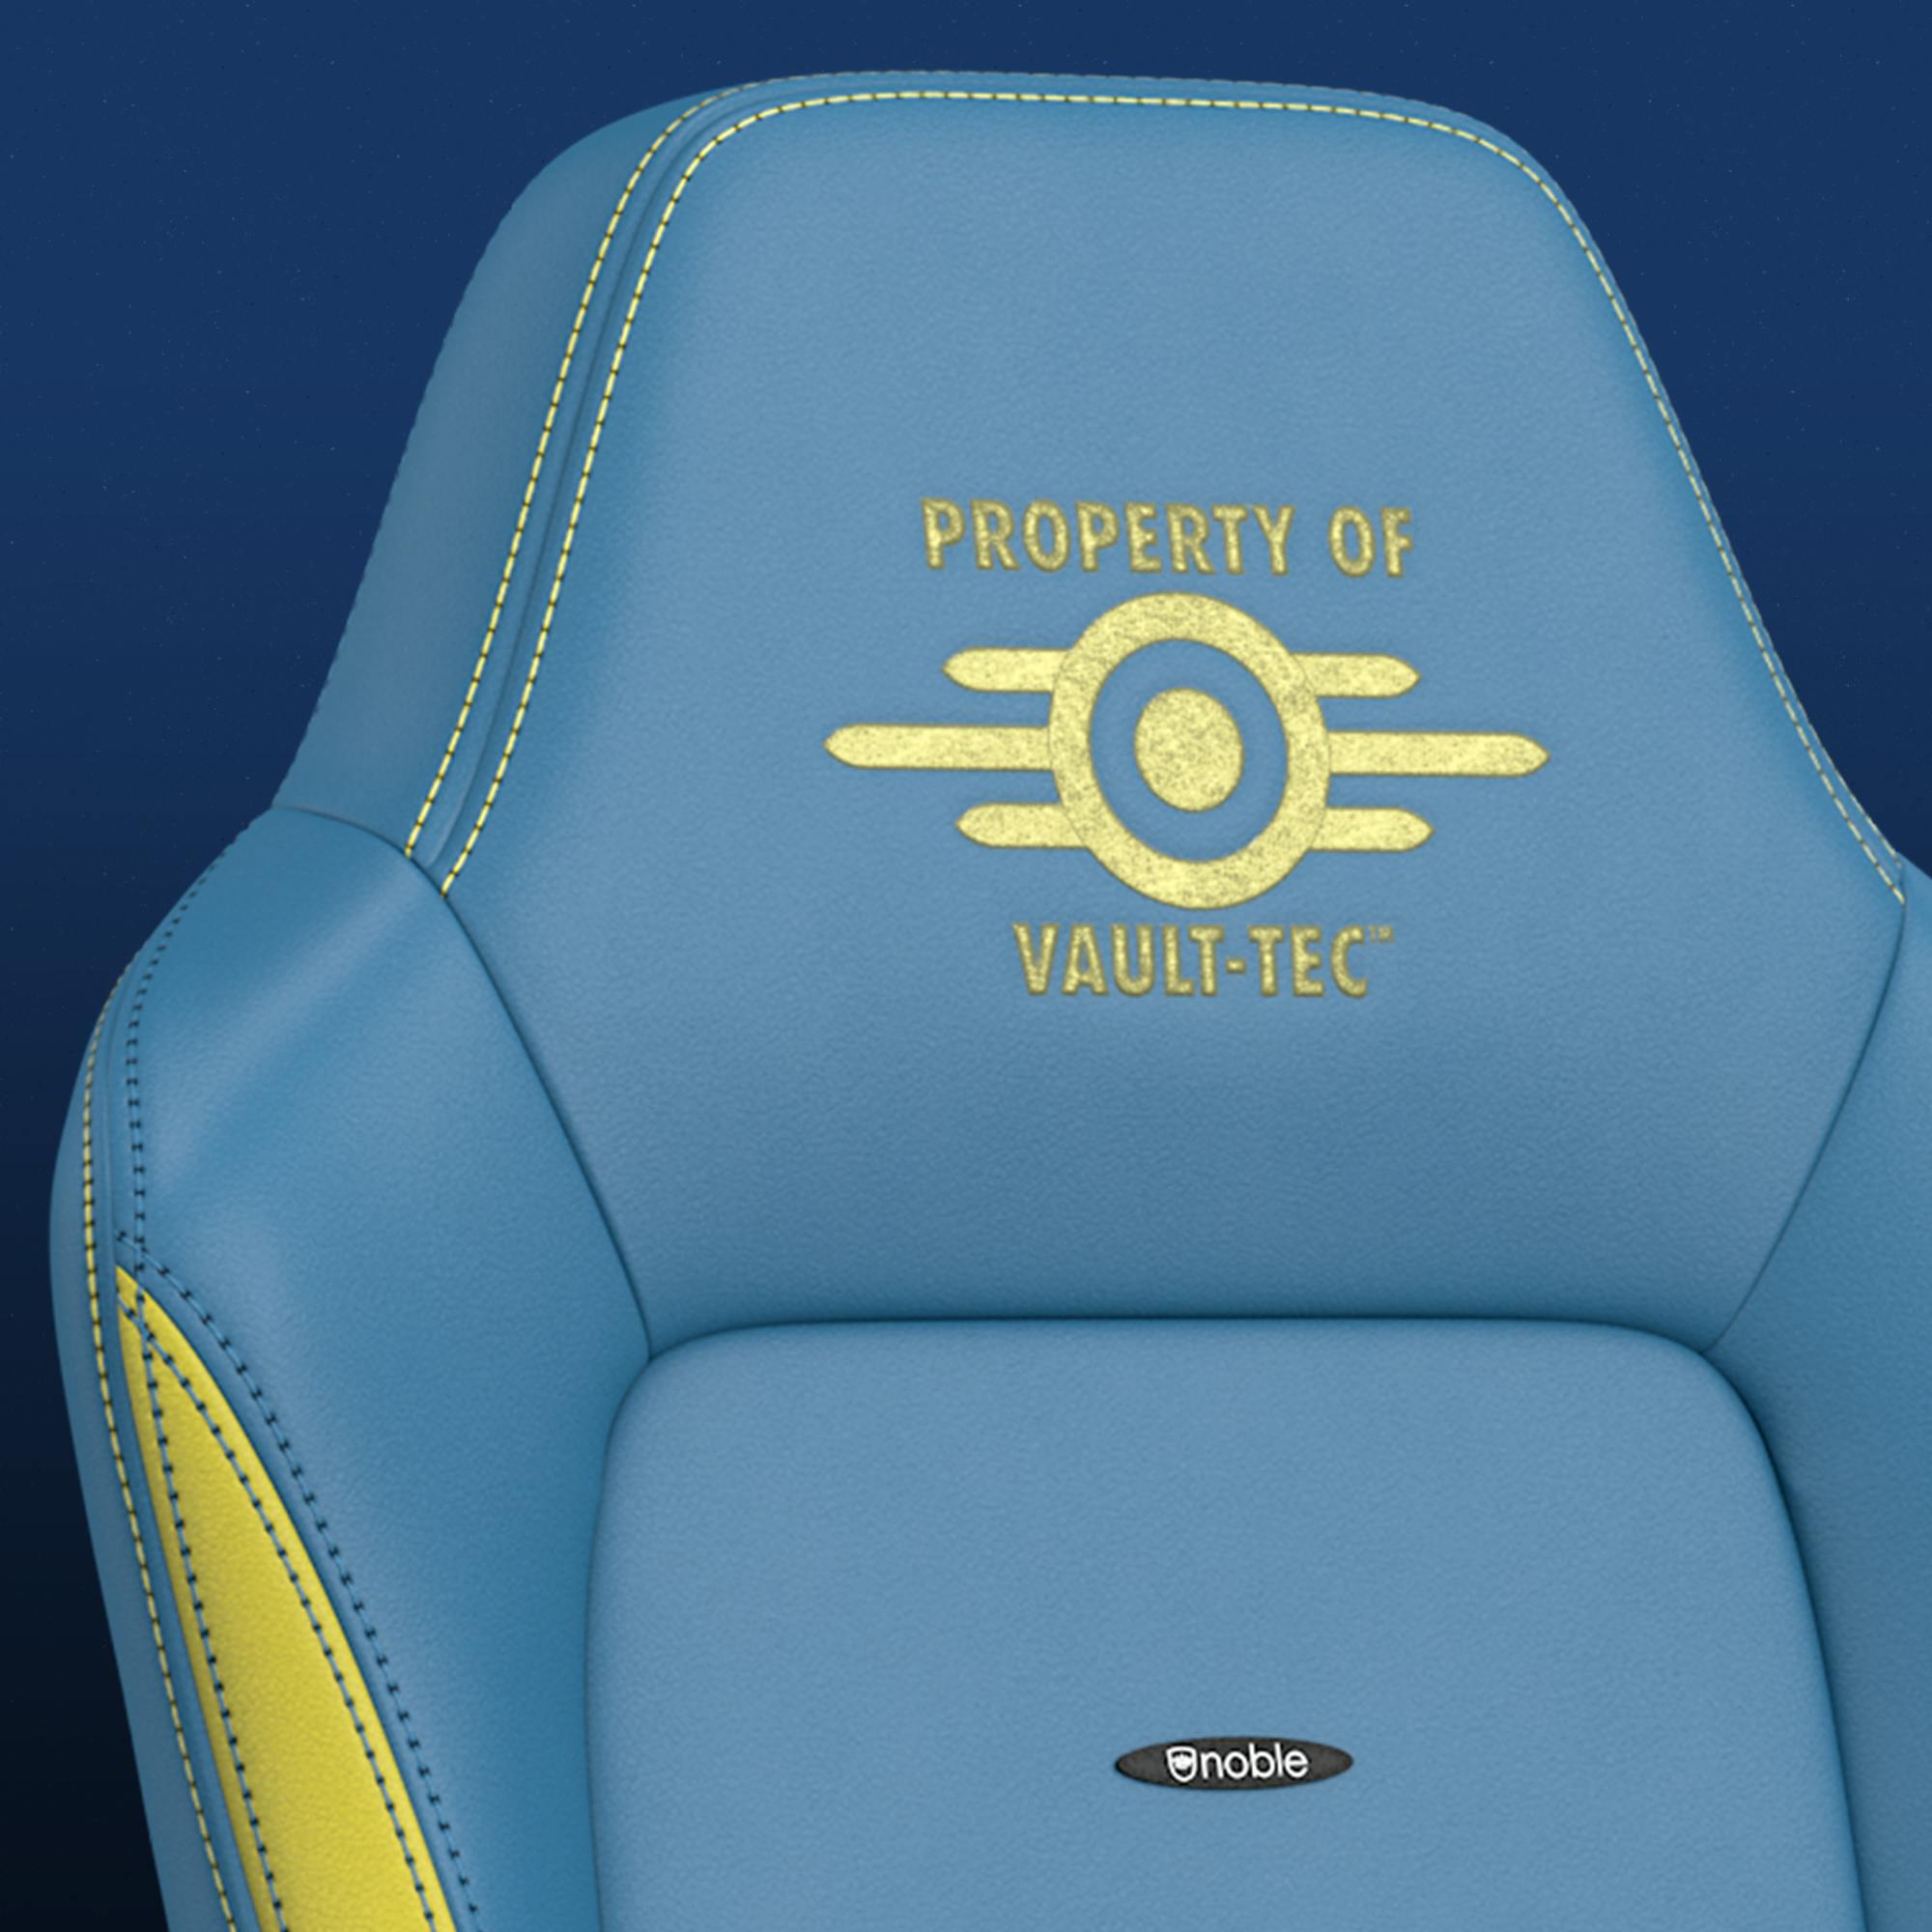 Gaming Chair Vault-Tec Vegan PU Leather Highlighted Details View